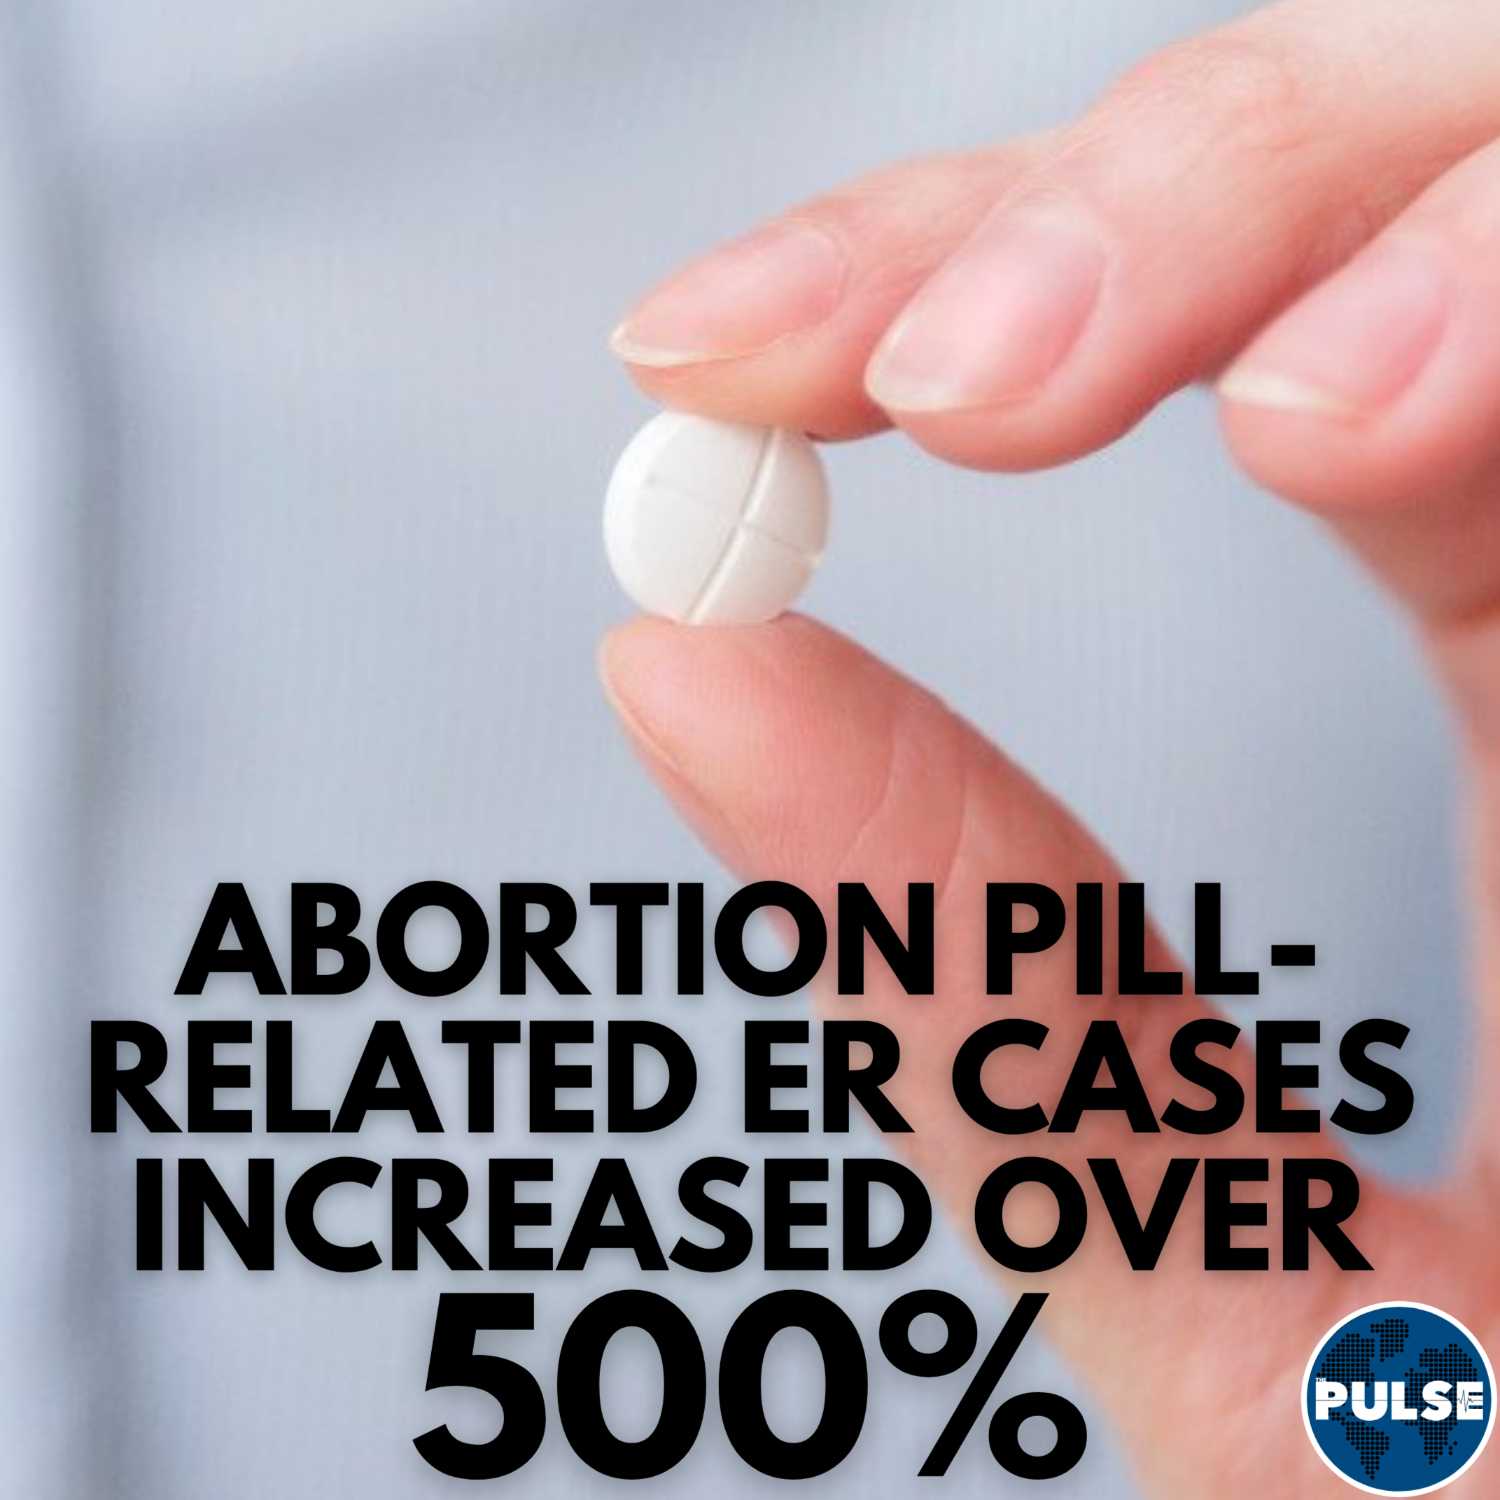 PULSE: Abortion Pill-Related ER Cases Increases Over 500%, and more news items